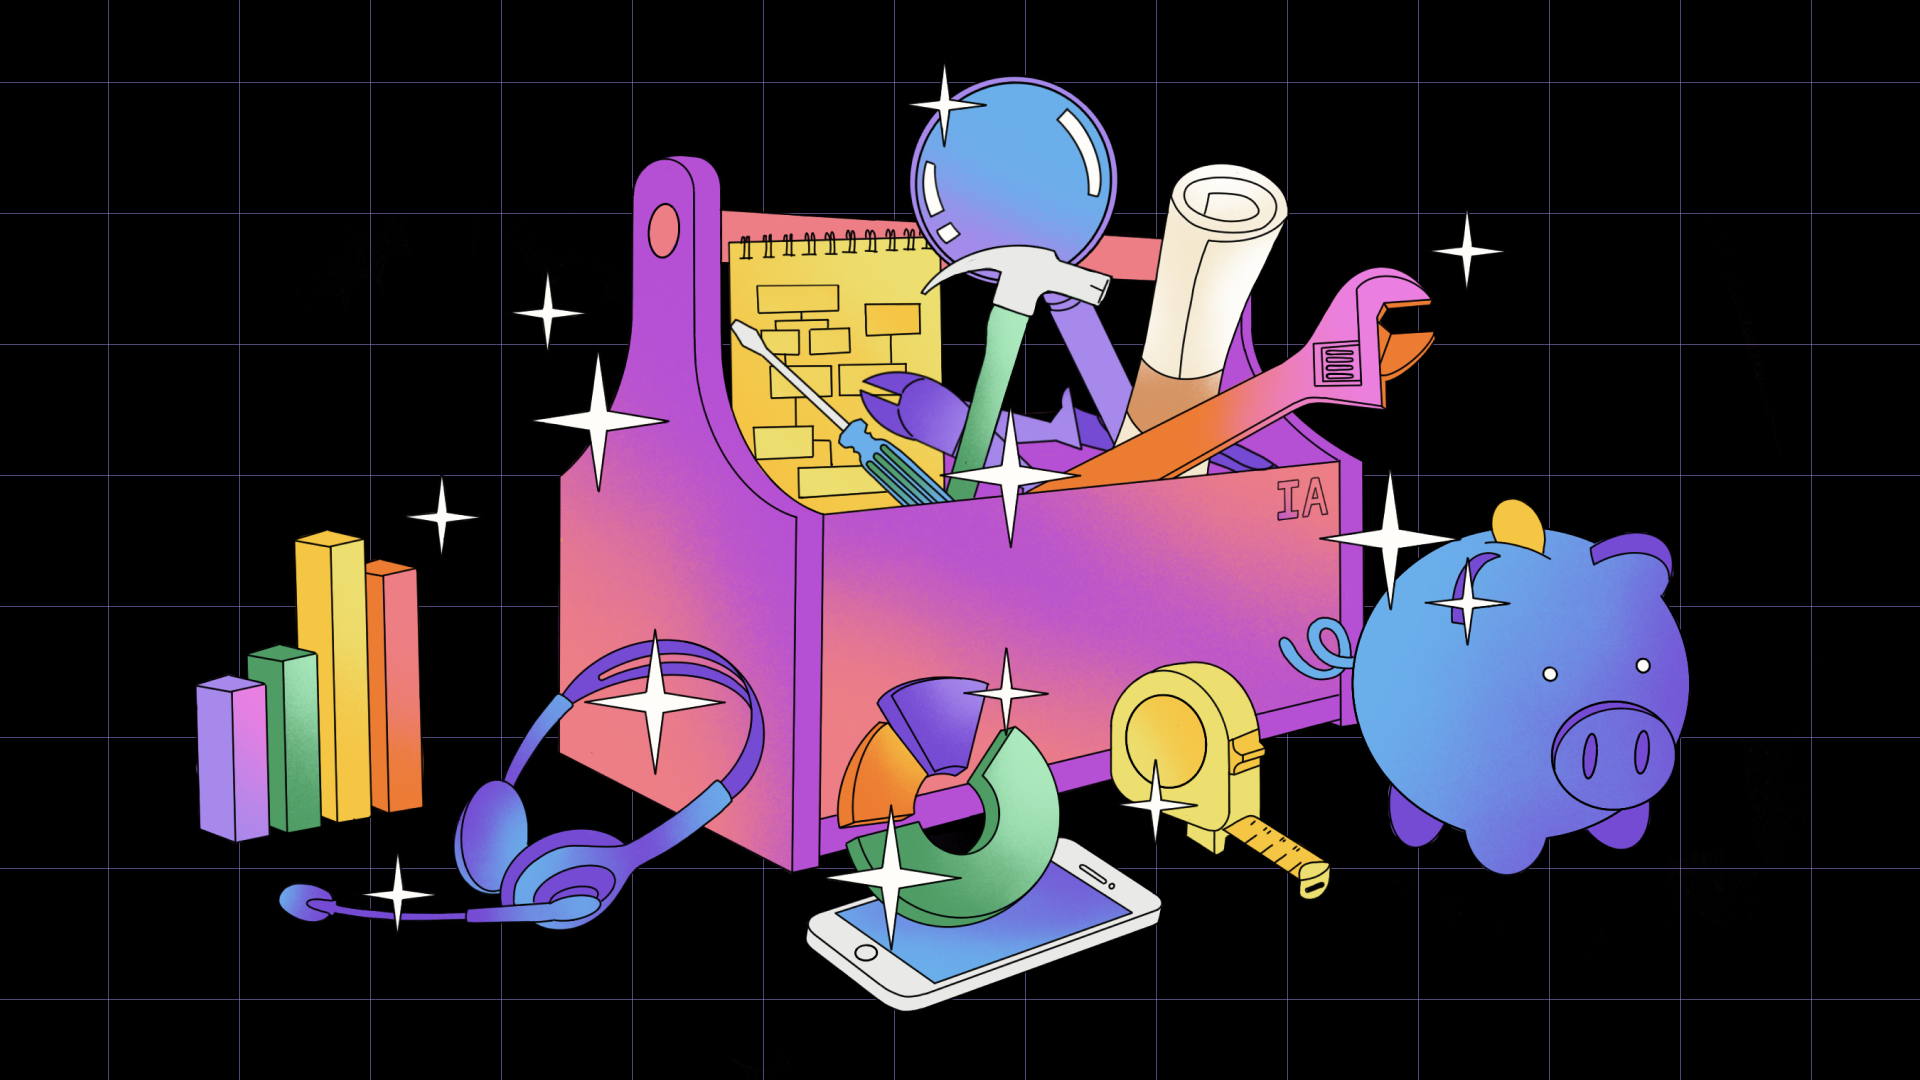 Illustration of a toolbox with AI on it and tools, devices, journey maps, customer service headphones, and data charts